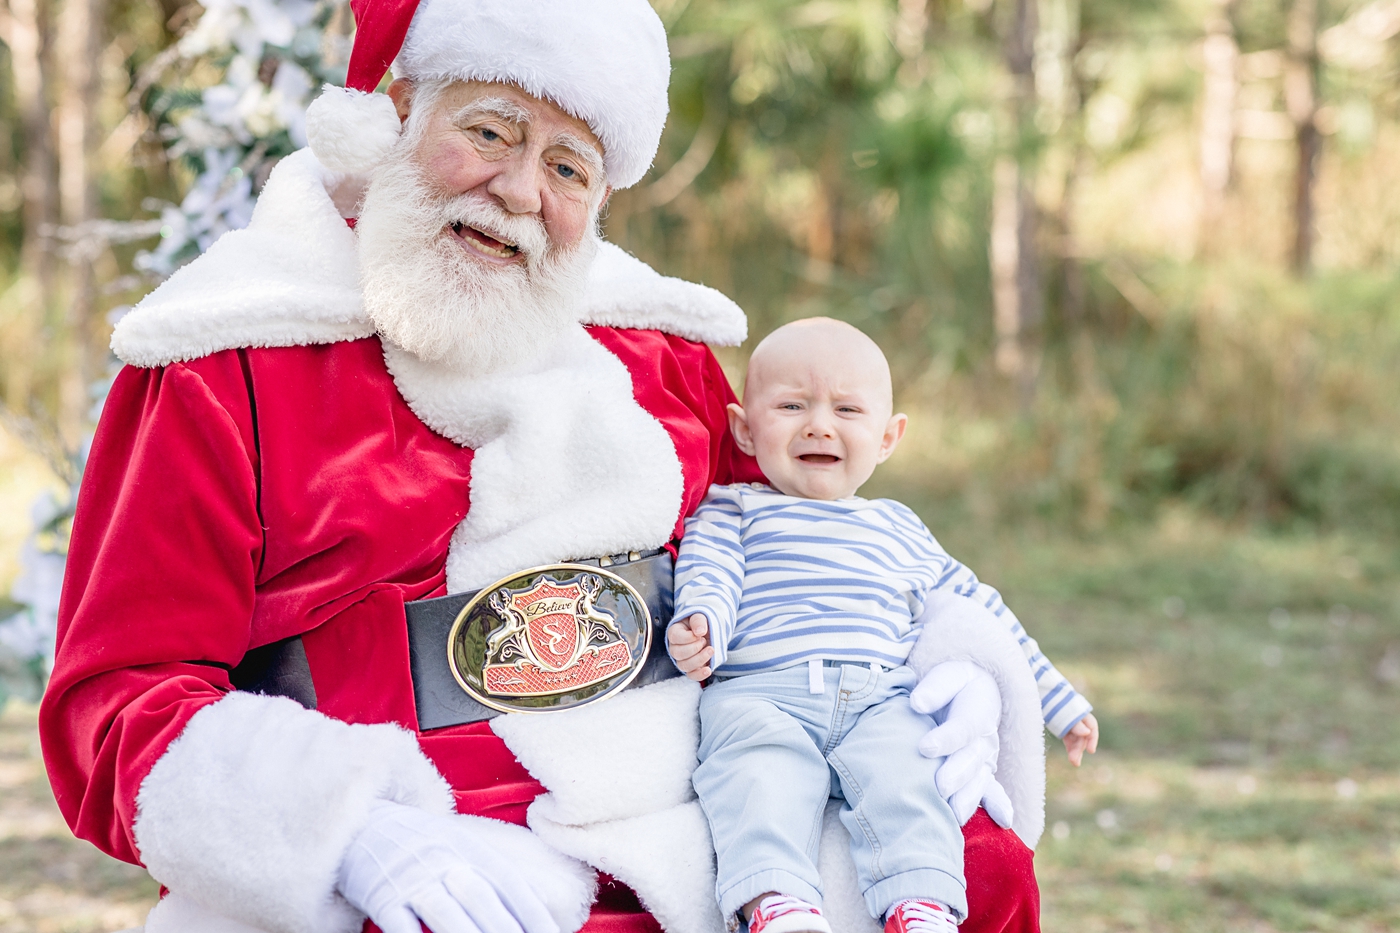 Baby boy is unsure of Santa Claus. Photo by Ivanna Vidal Photography.